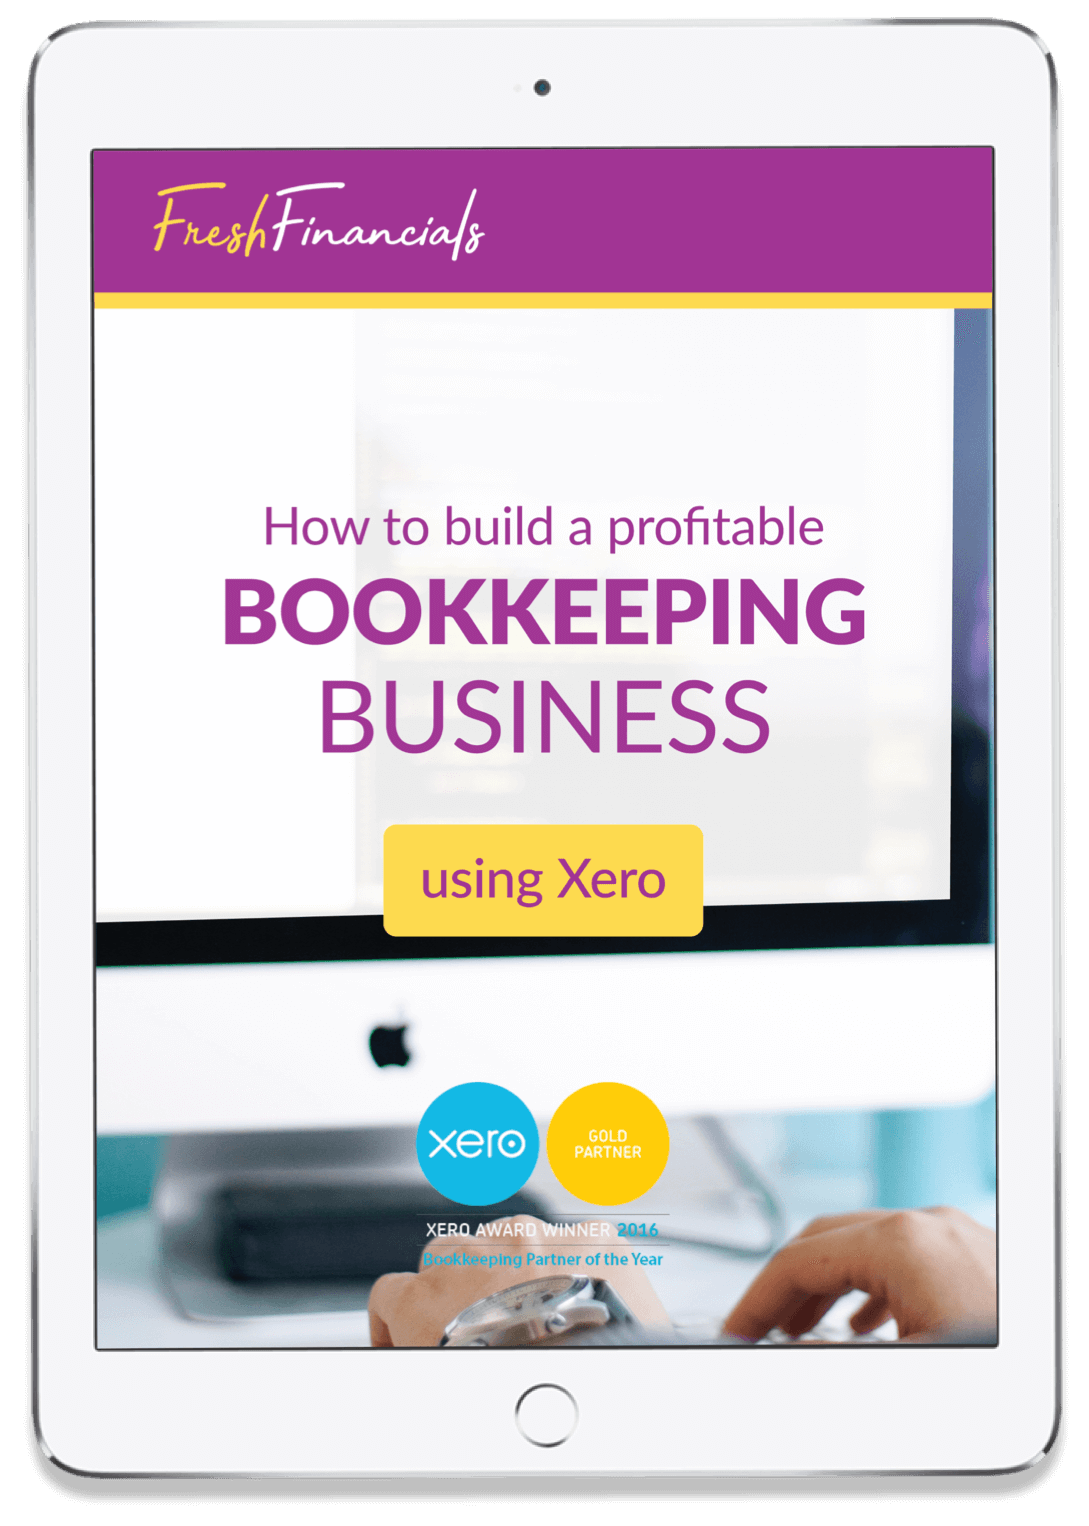 Profitable bookkeeping business